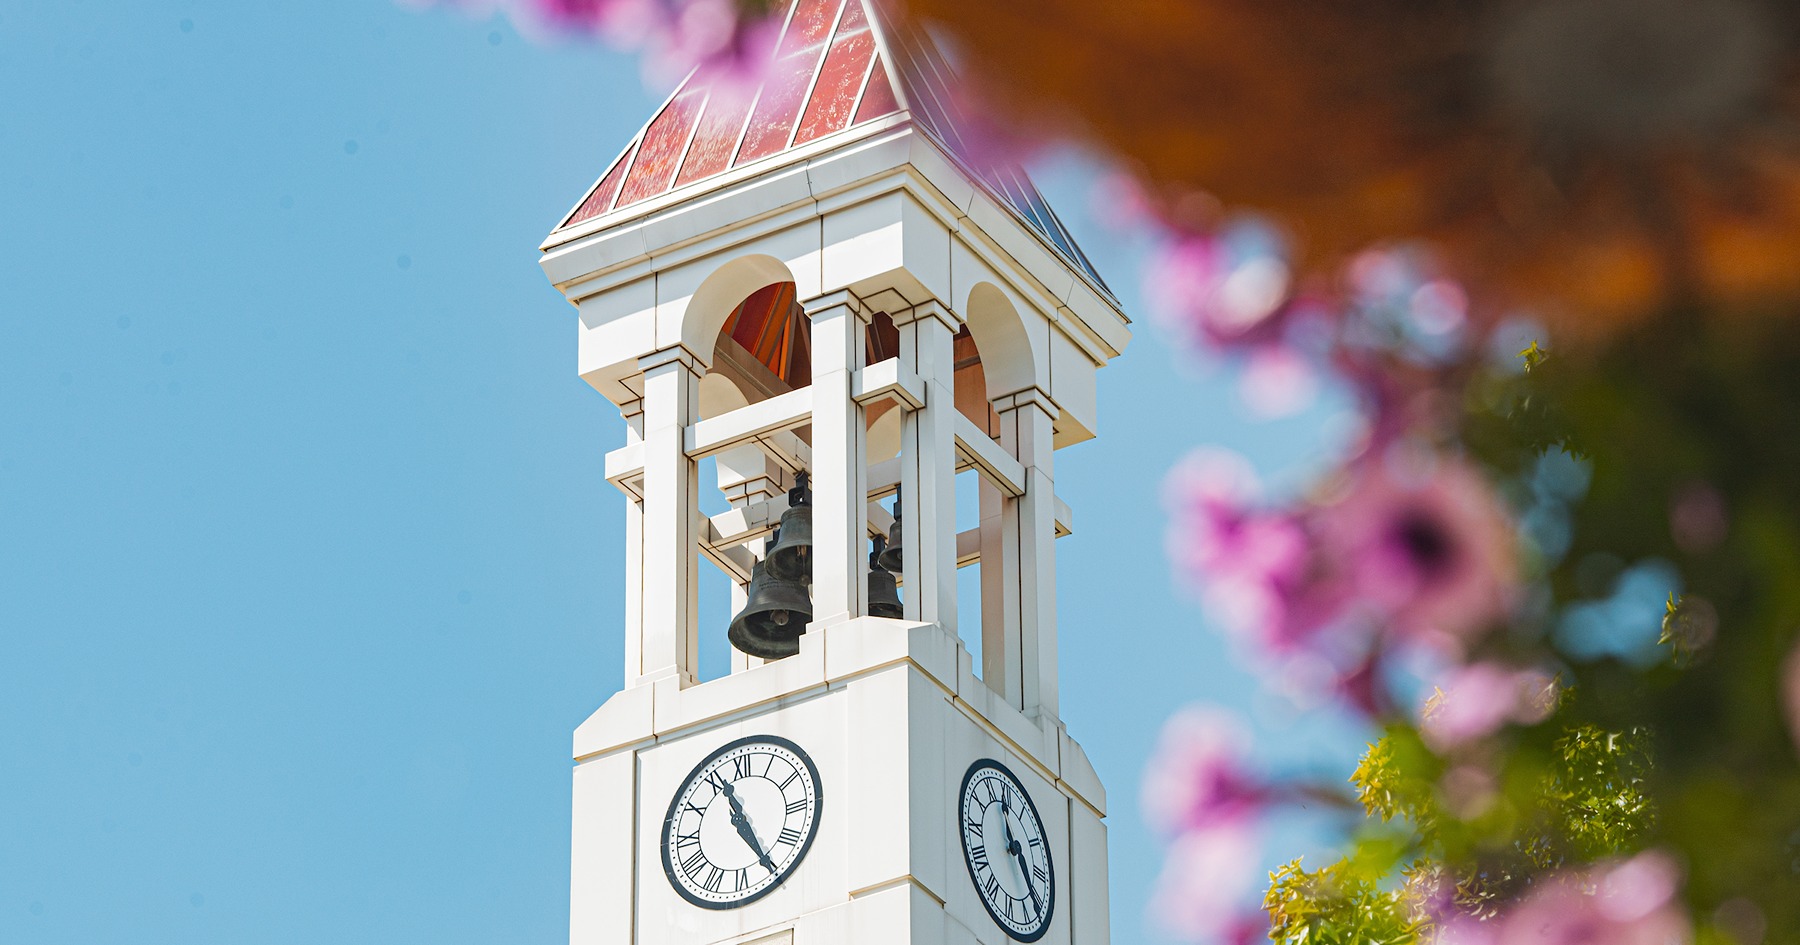 Purdue's bell tower stands tall behind a foreground of purple petunias